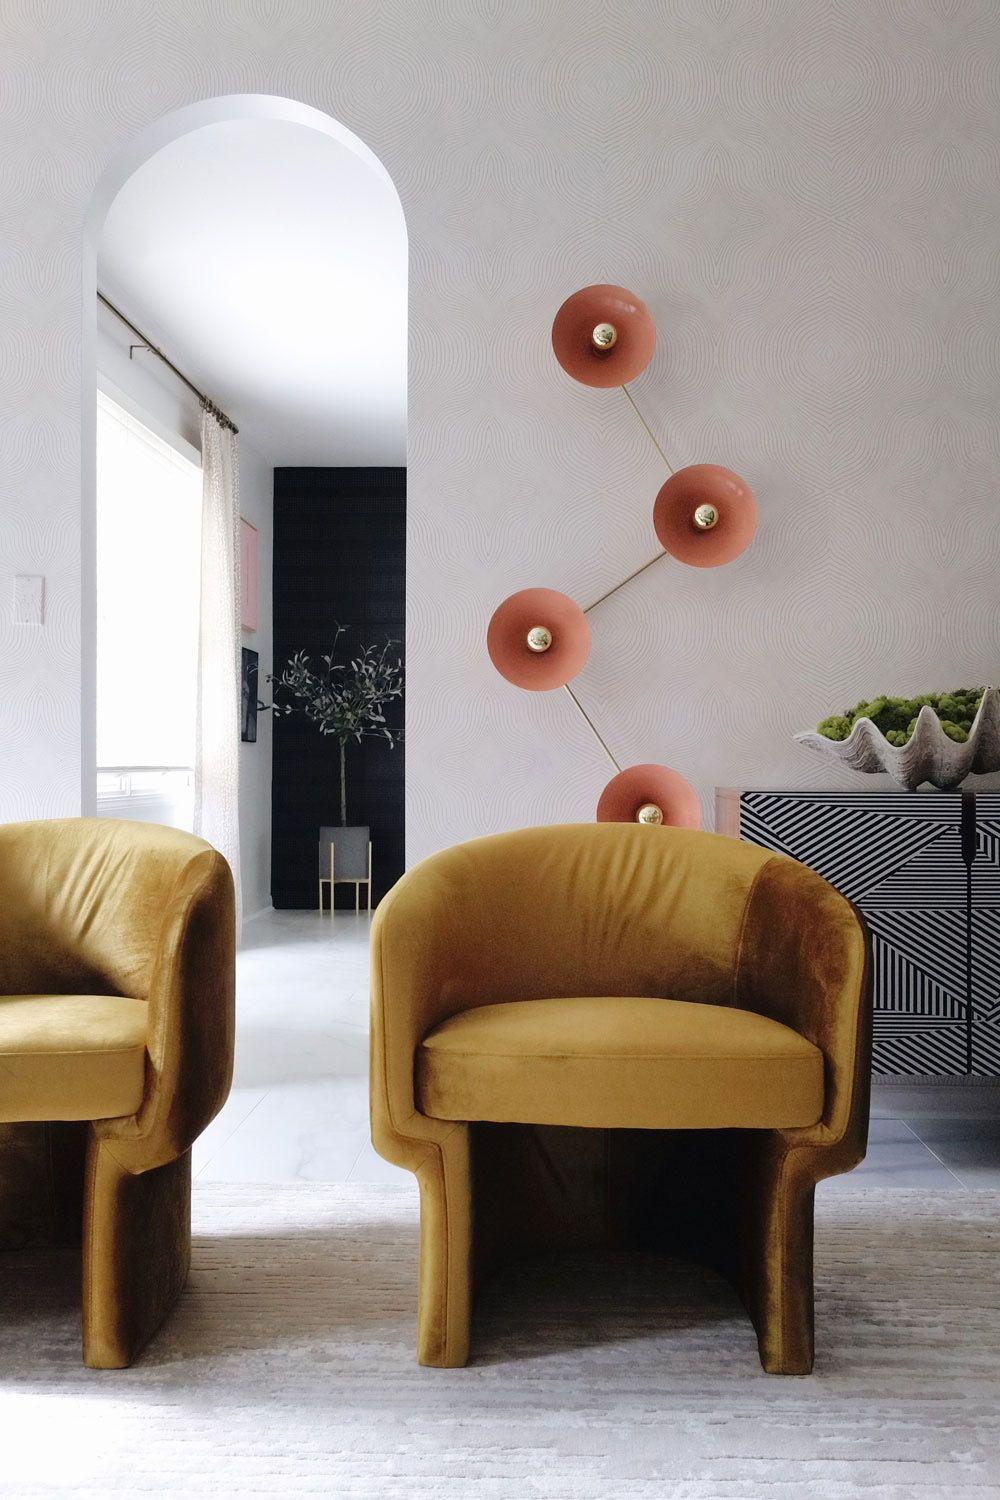 Contemporary Multi-Focal Wall Light in Brass and Blush Enamel by Blueprint Lighting, 2019 